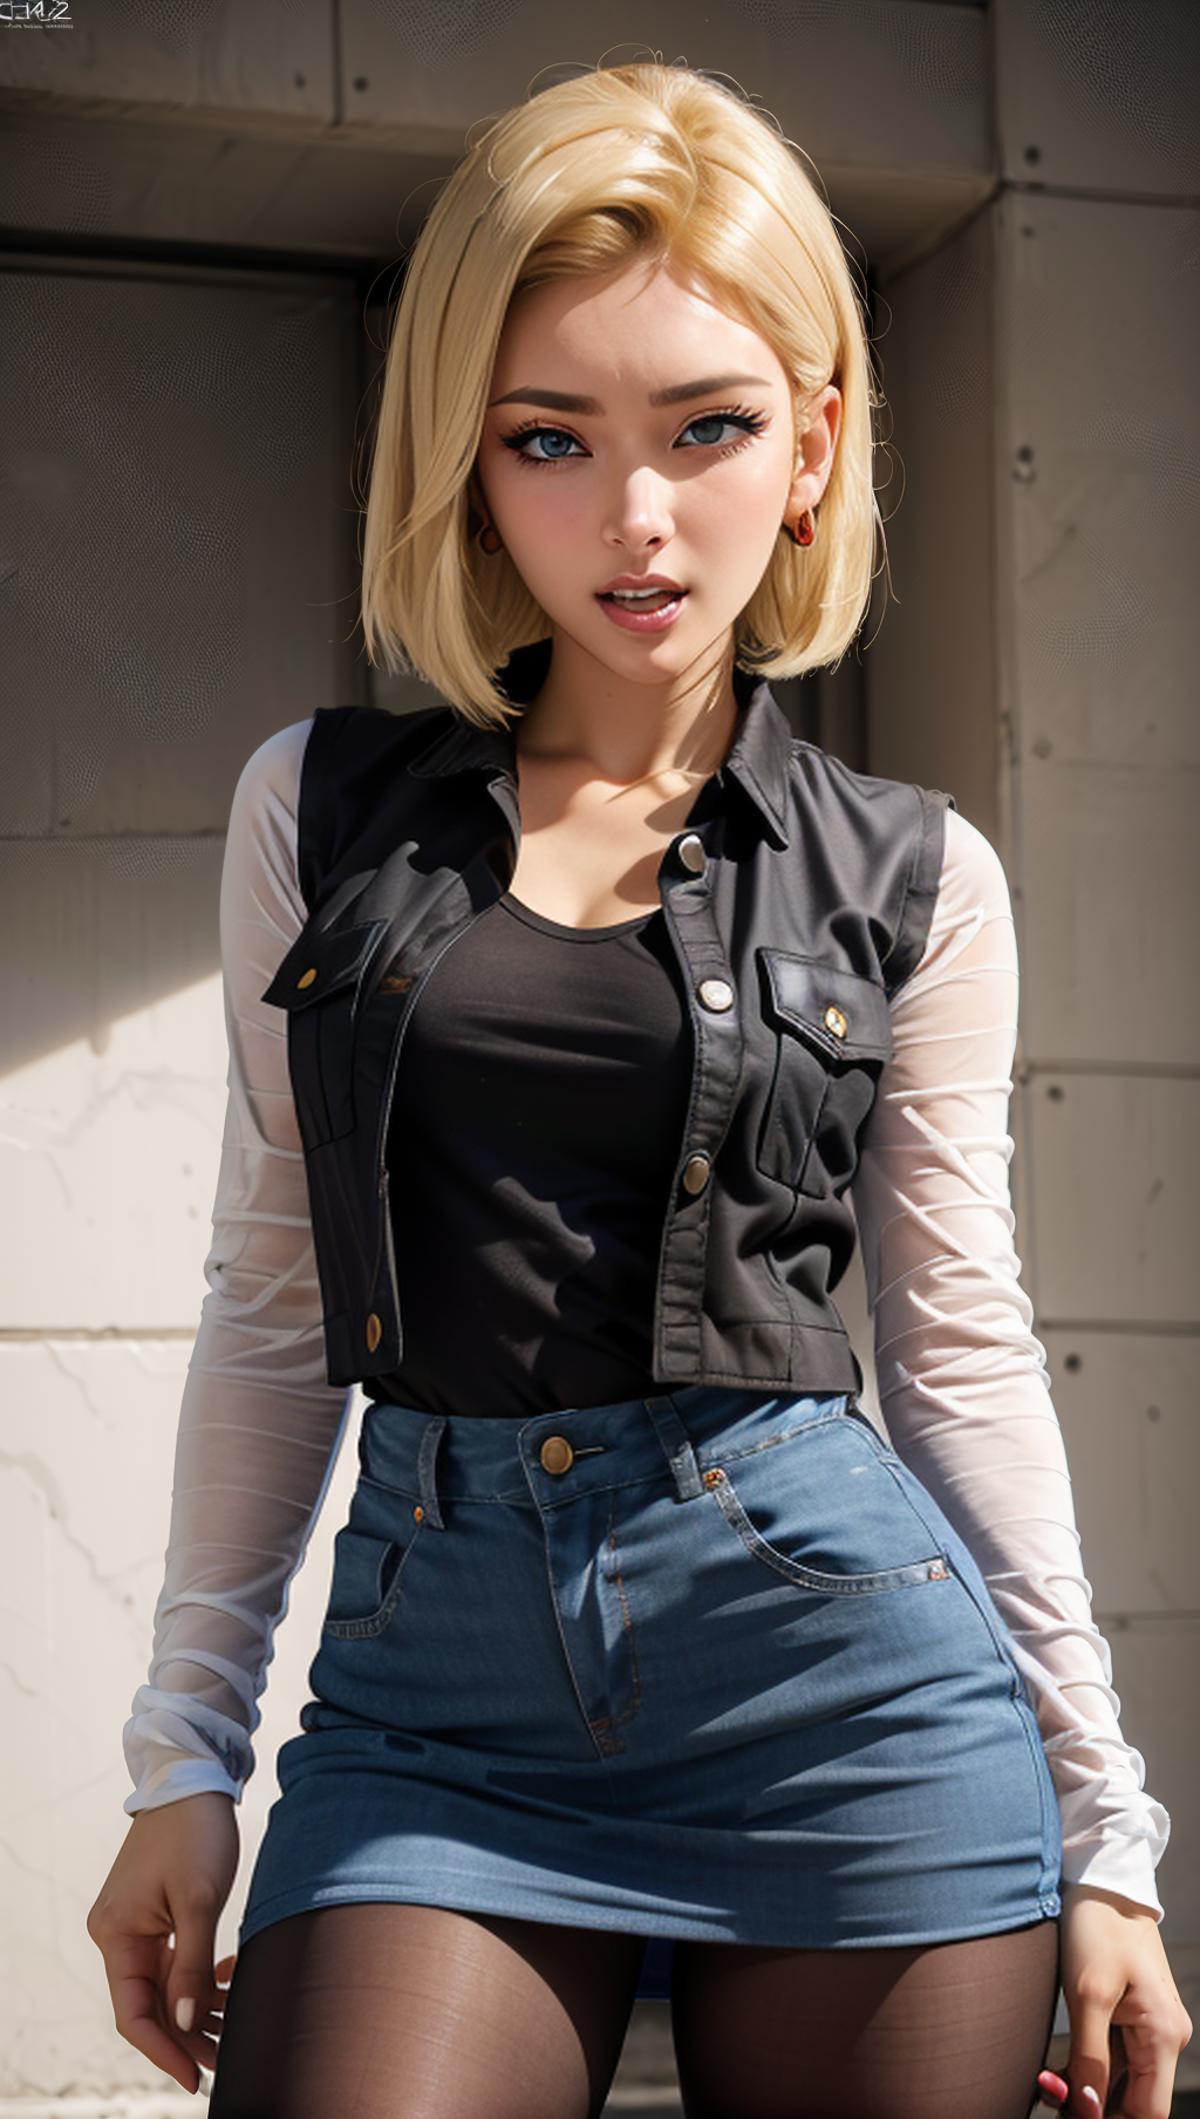 A young woman wearing a black shirt and blue jeans, posing for a picture.